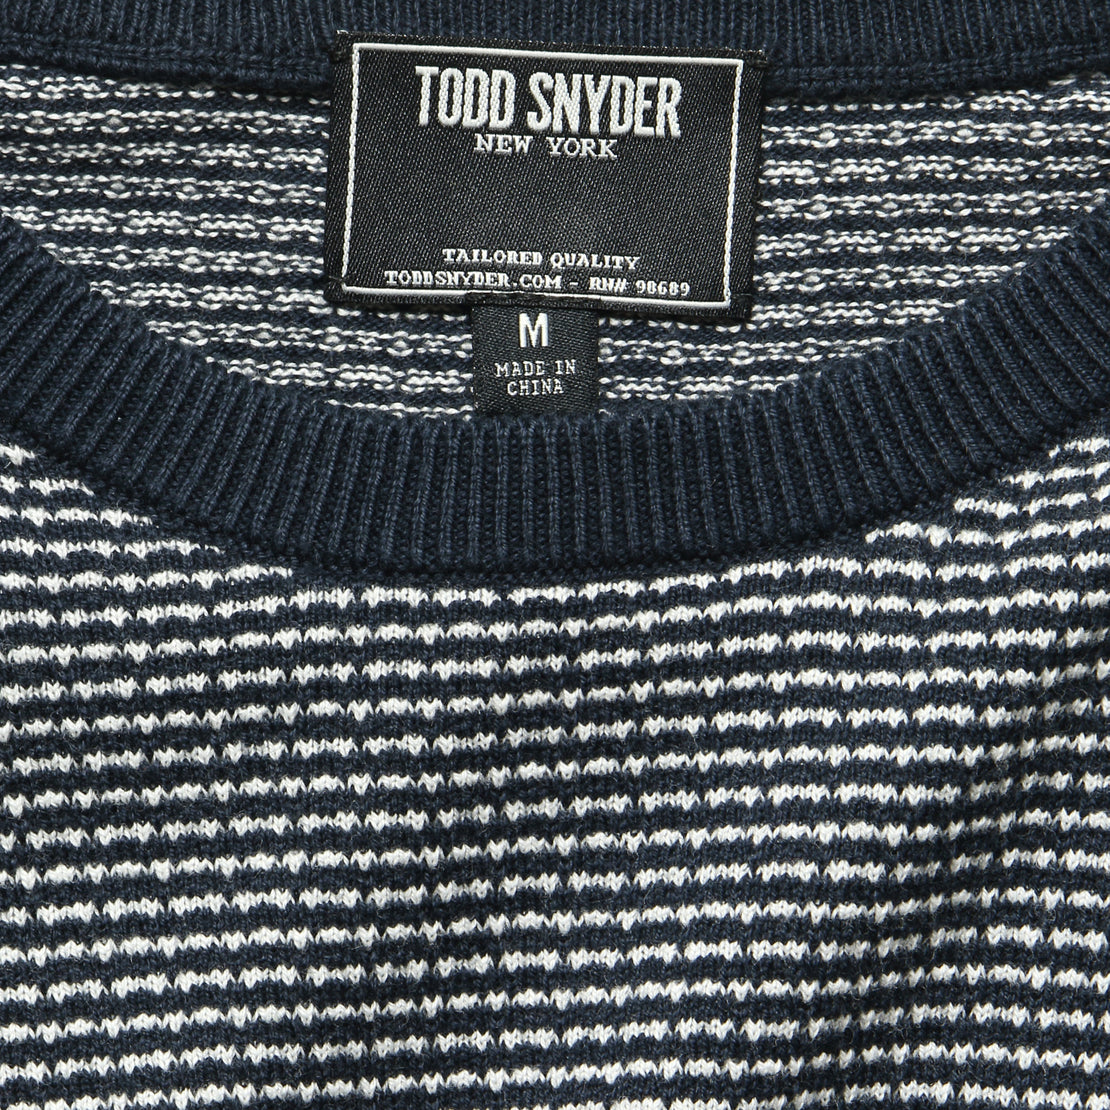 Stripe Cotton Crewneck Sweater - Navy - Todd Snyder - STAG Provisions - Tops - Sweater